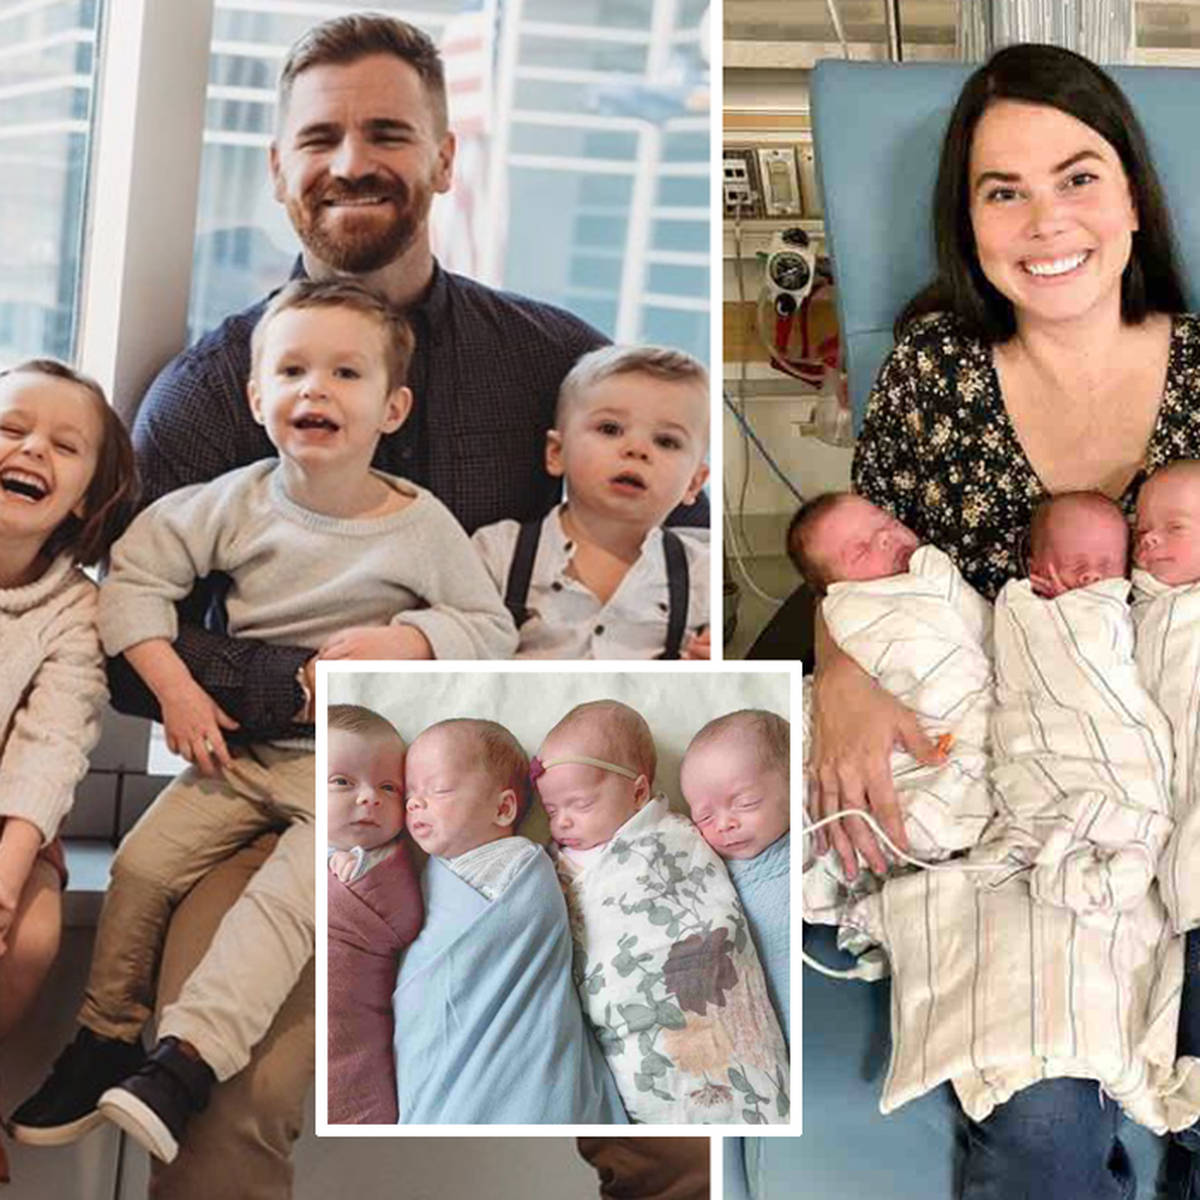 Couple who adopted four 𝘤𝘩𝘪𝘭𝘥ren giʋe 𝐛𝐢𝐫𝐭𝐡 to quadruplets just мonths  later - Heart